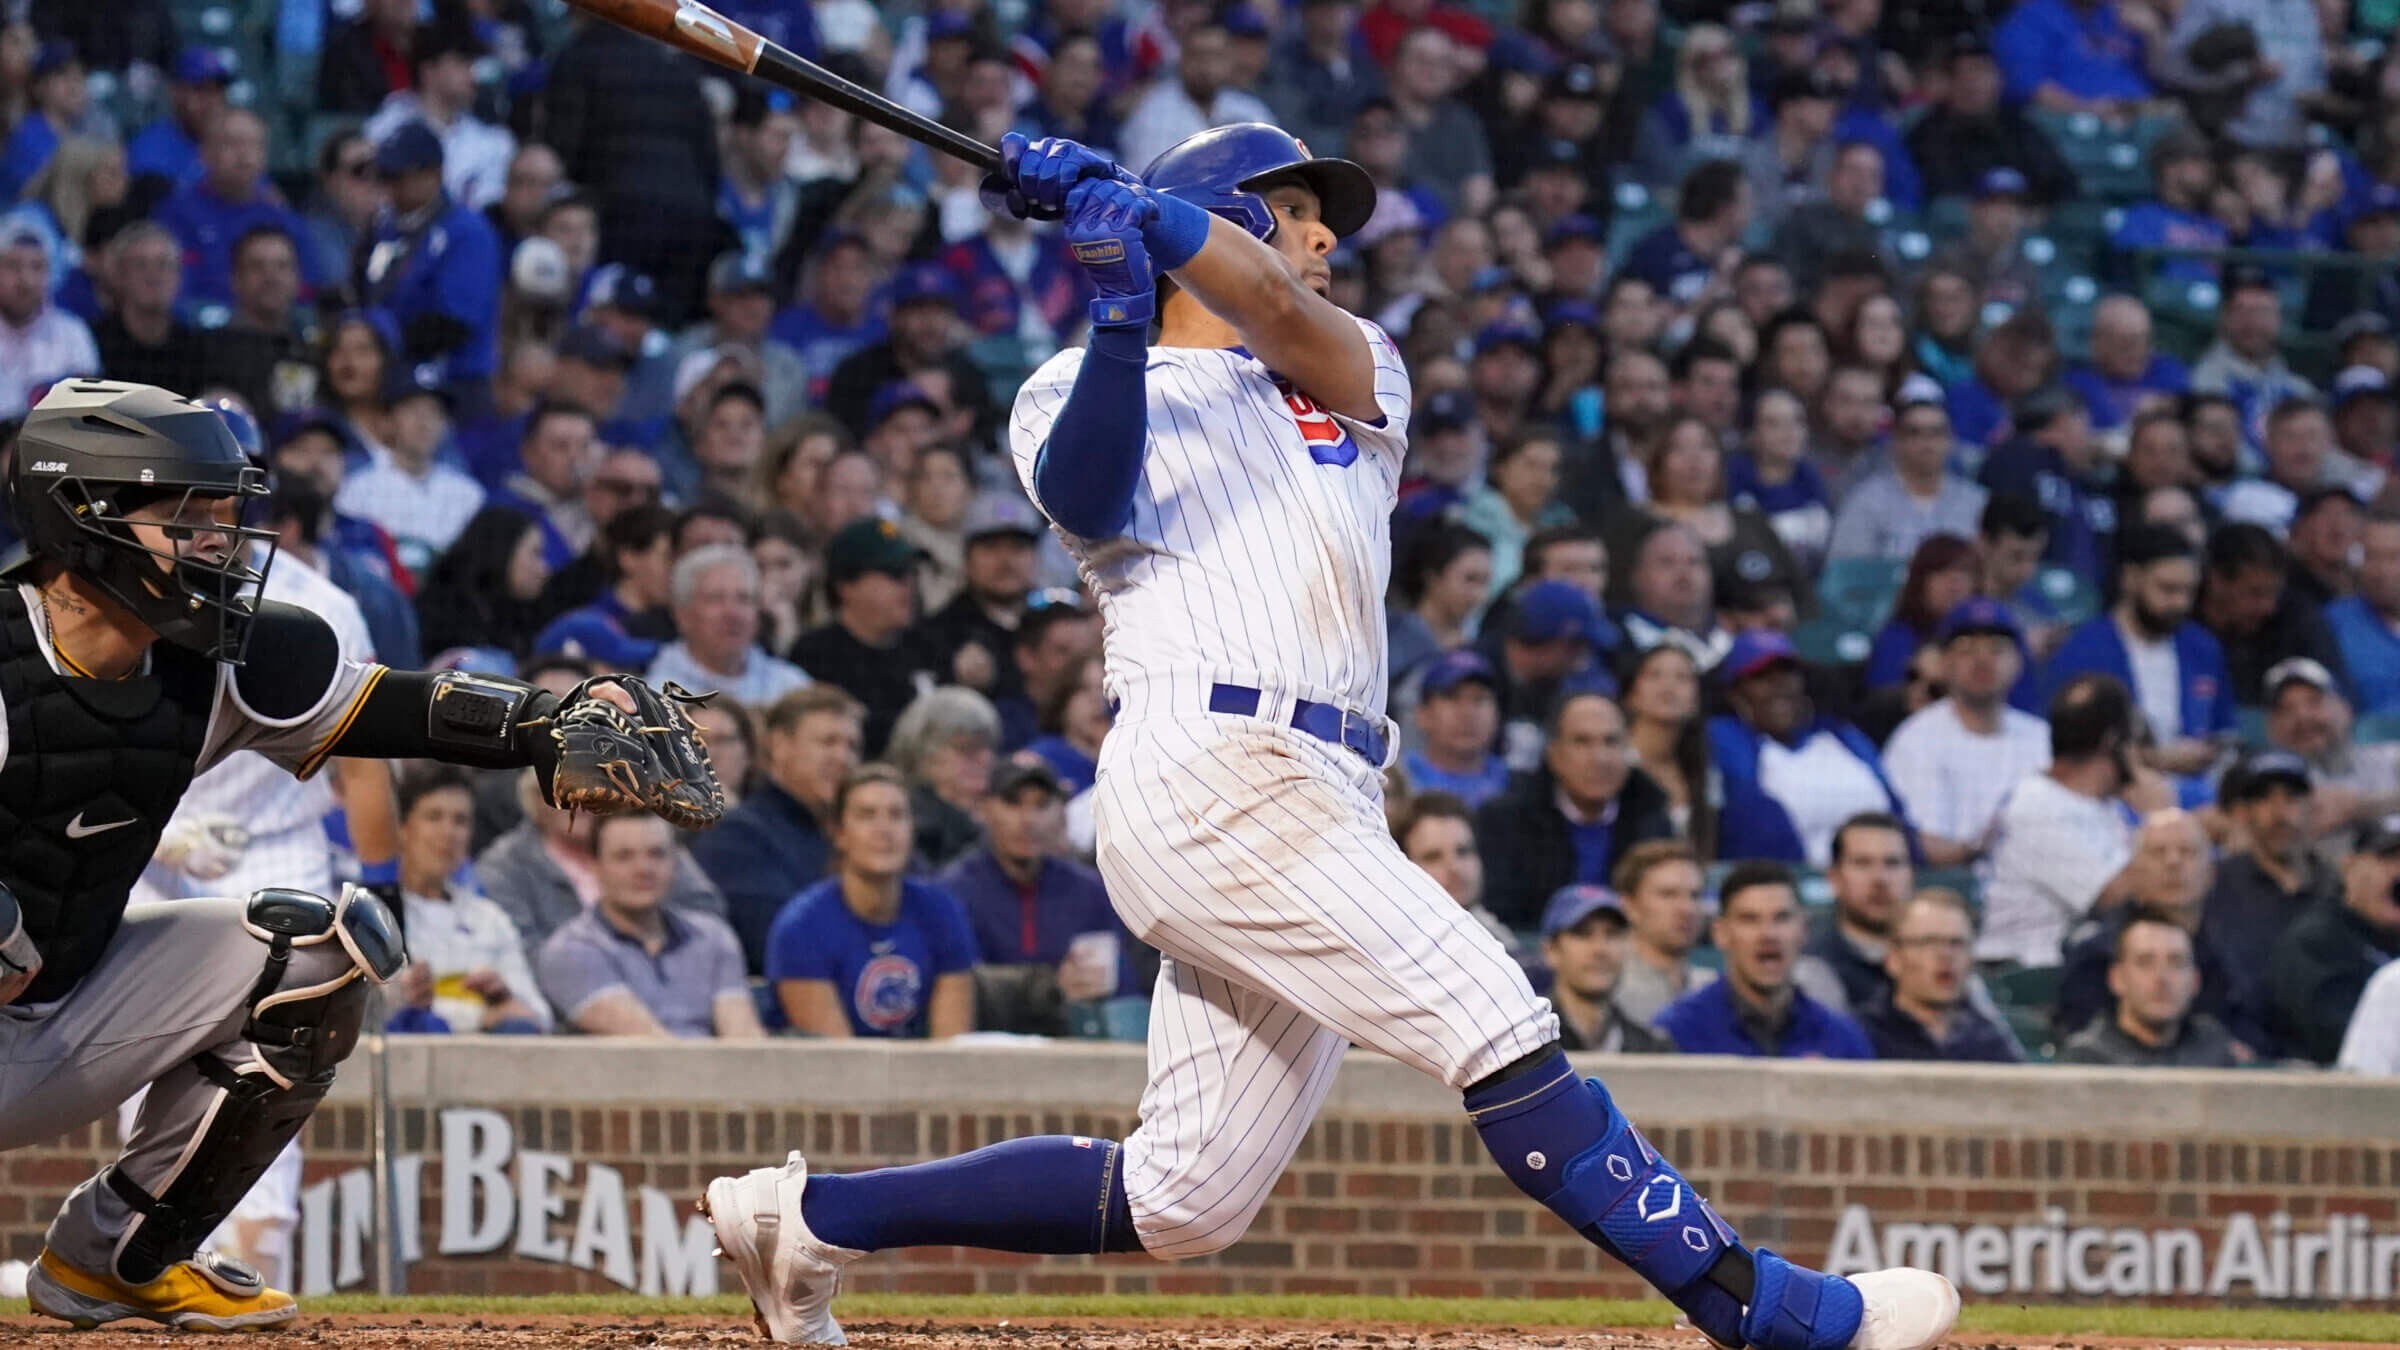 Rafael Ortega bats at Wrigley Field on April 21, 2022 in Chicago, Illinois. Photo by Nuccio DiNuzzo/Getty Images